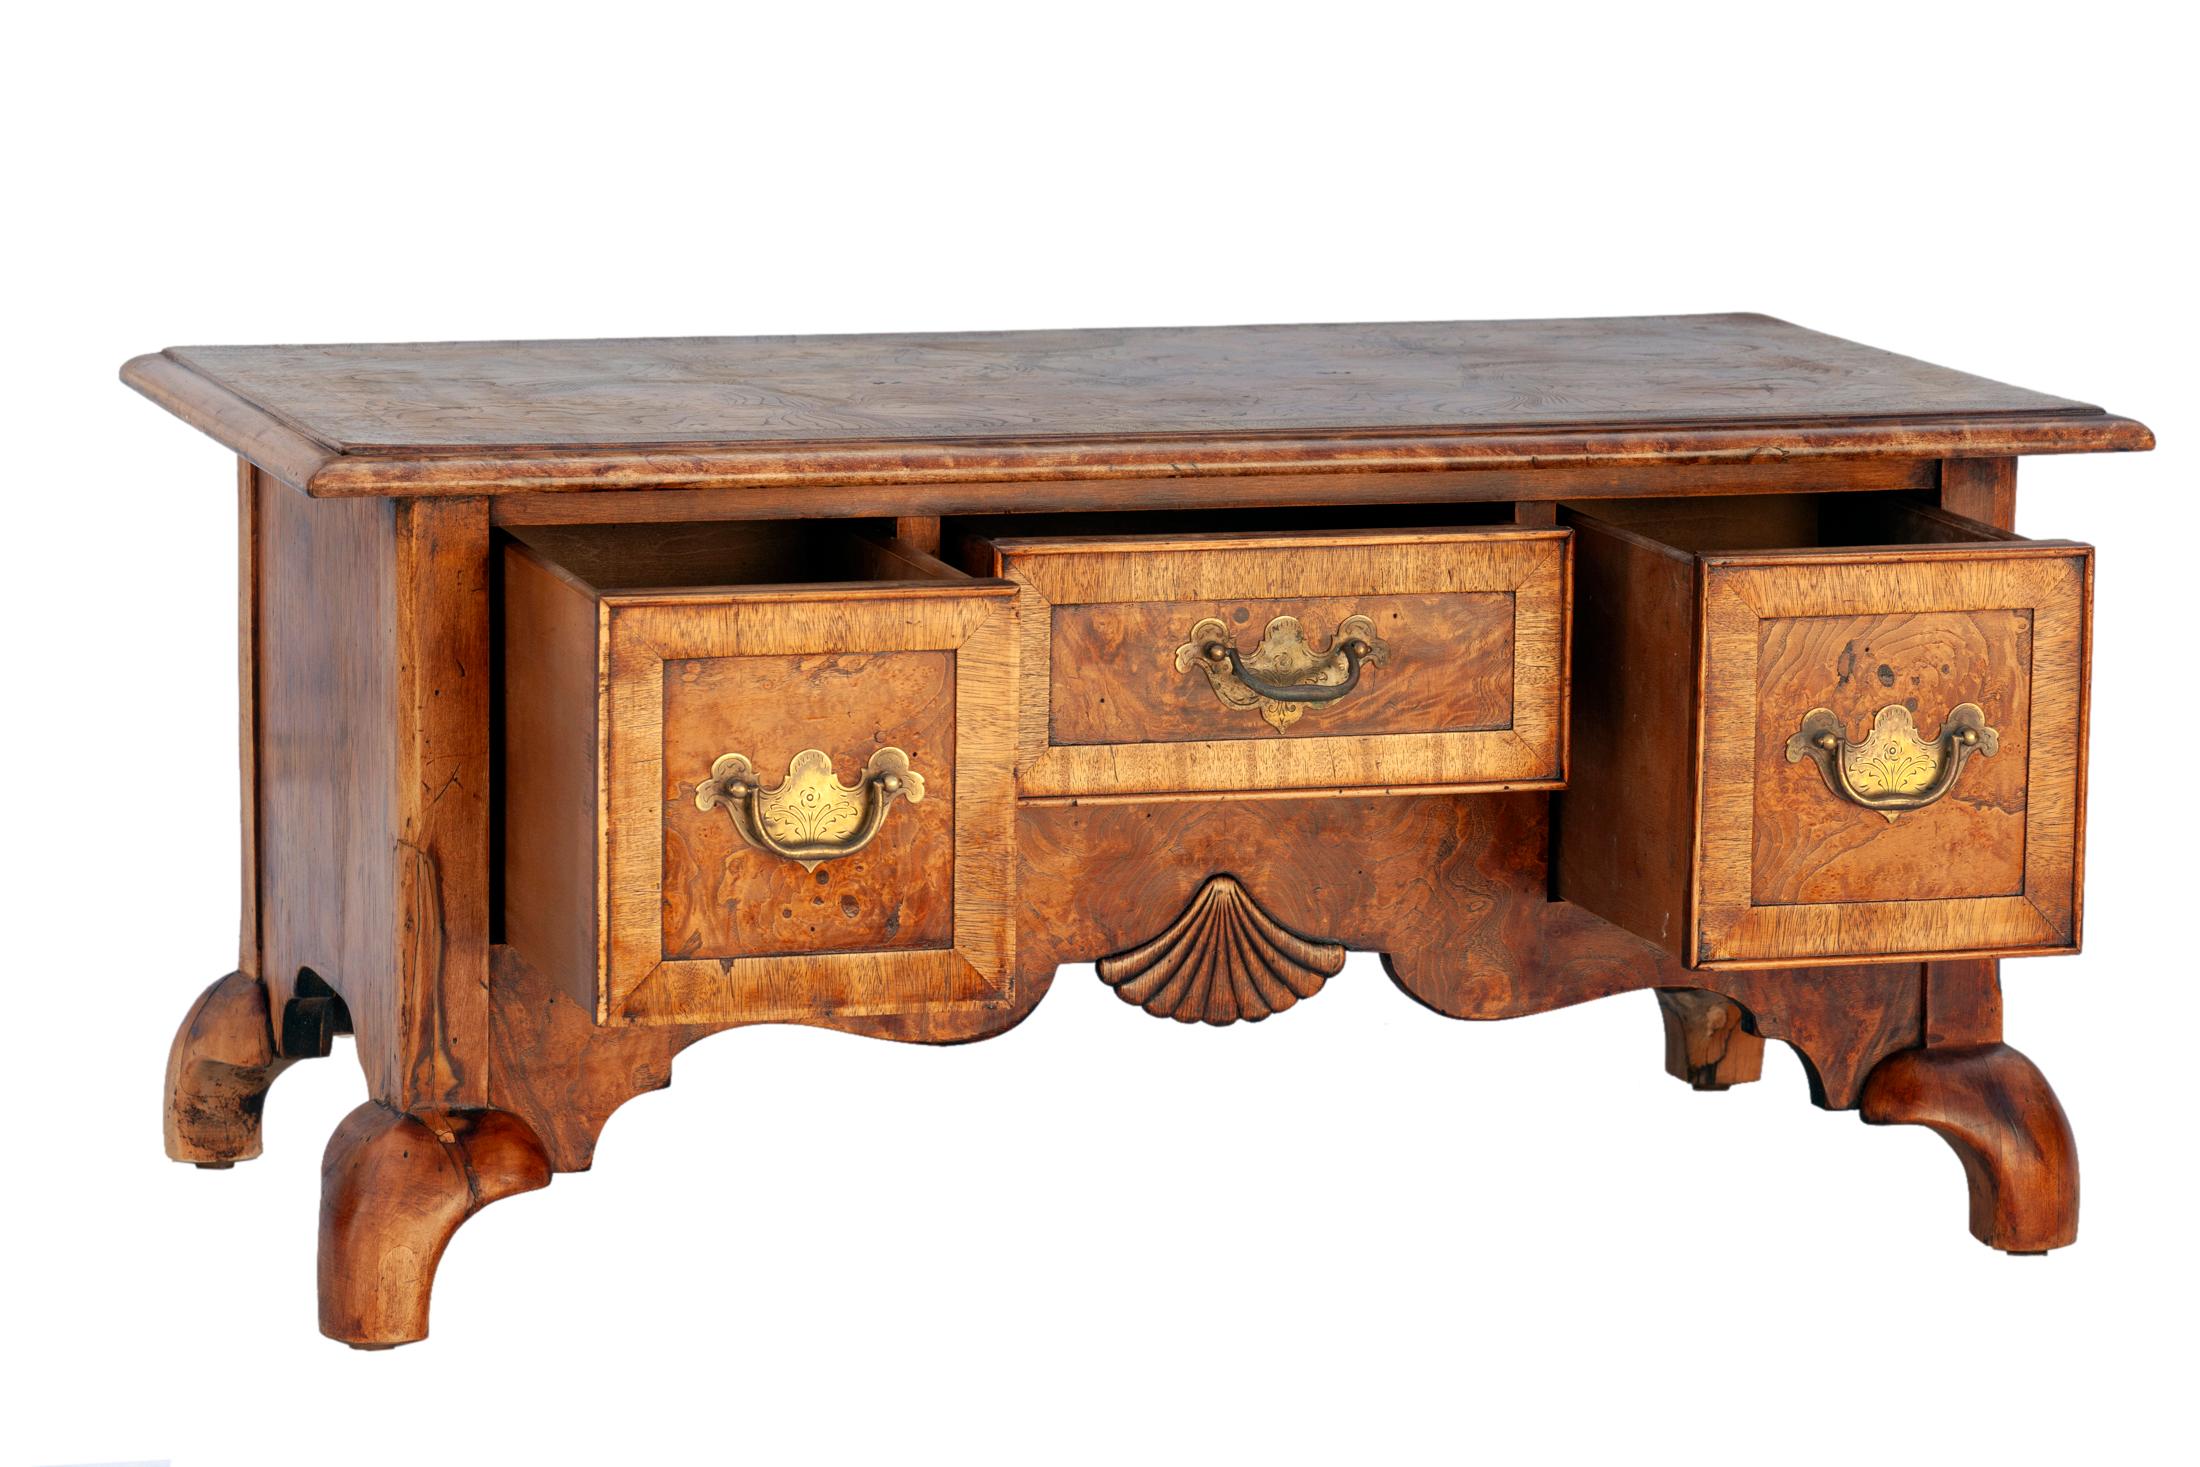 American Chippendale style burled walnut cabinet by Hekman furniture company of North Carolina. Very fine Burled walnut, brass hardware with an Asian flair. The chest has two spacious drawers with a smaller center drawer, below which is decorated